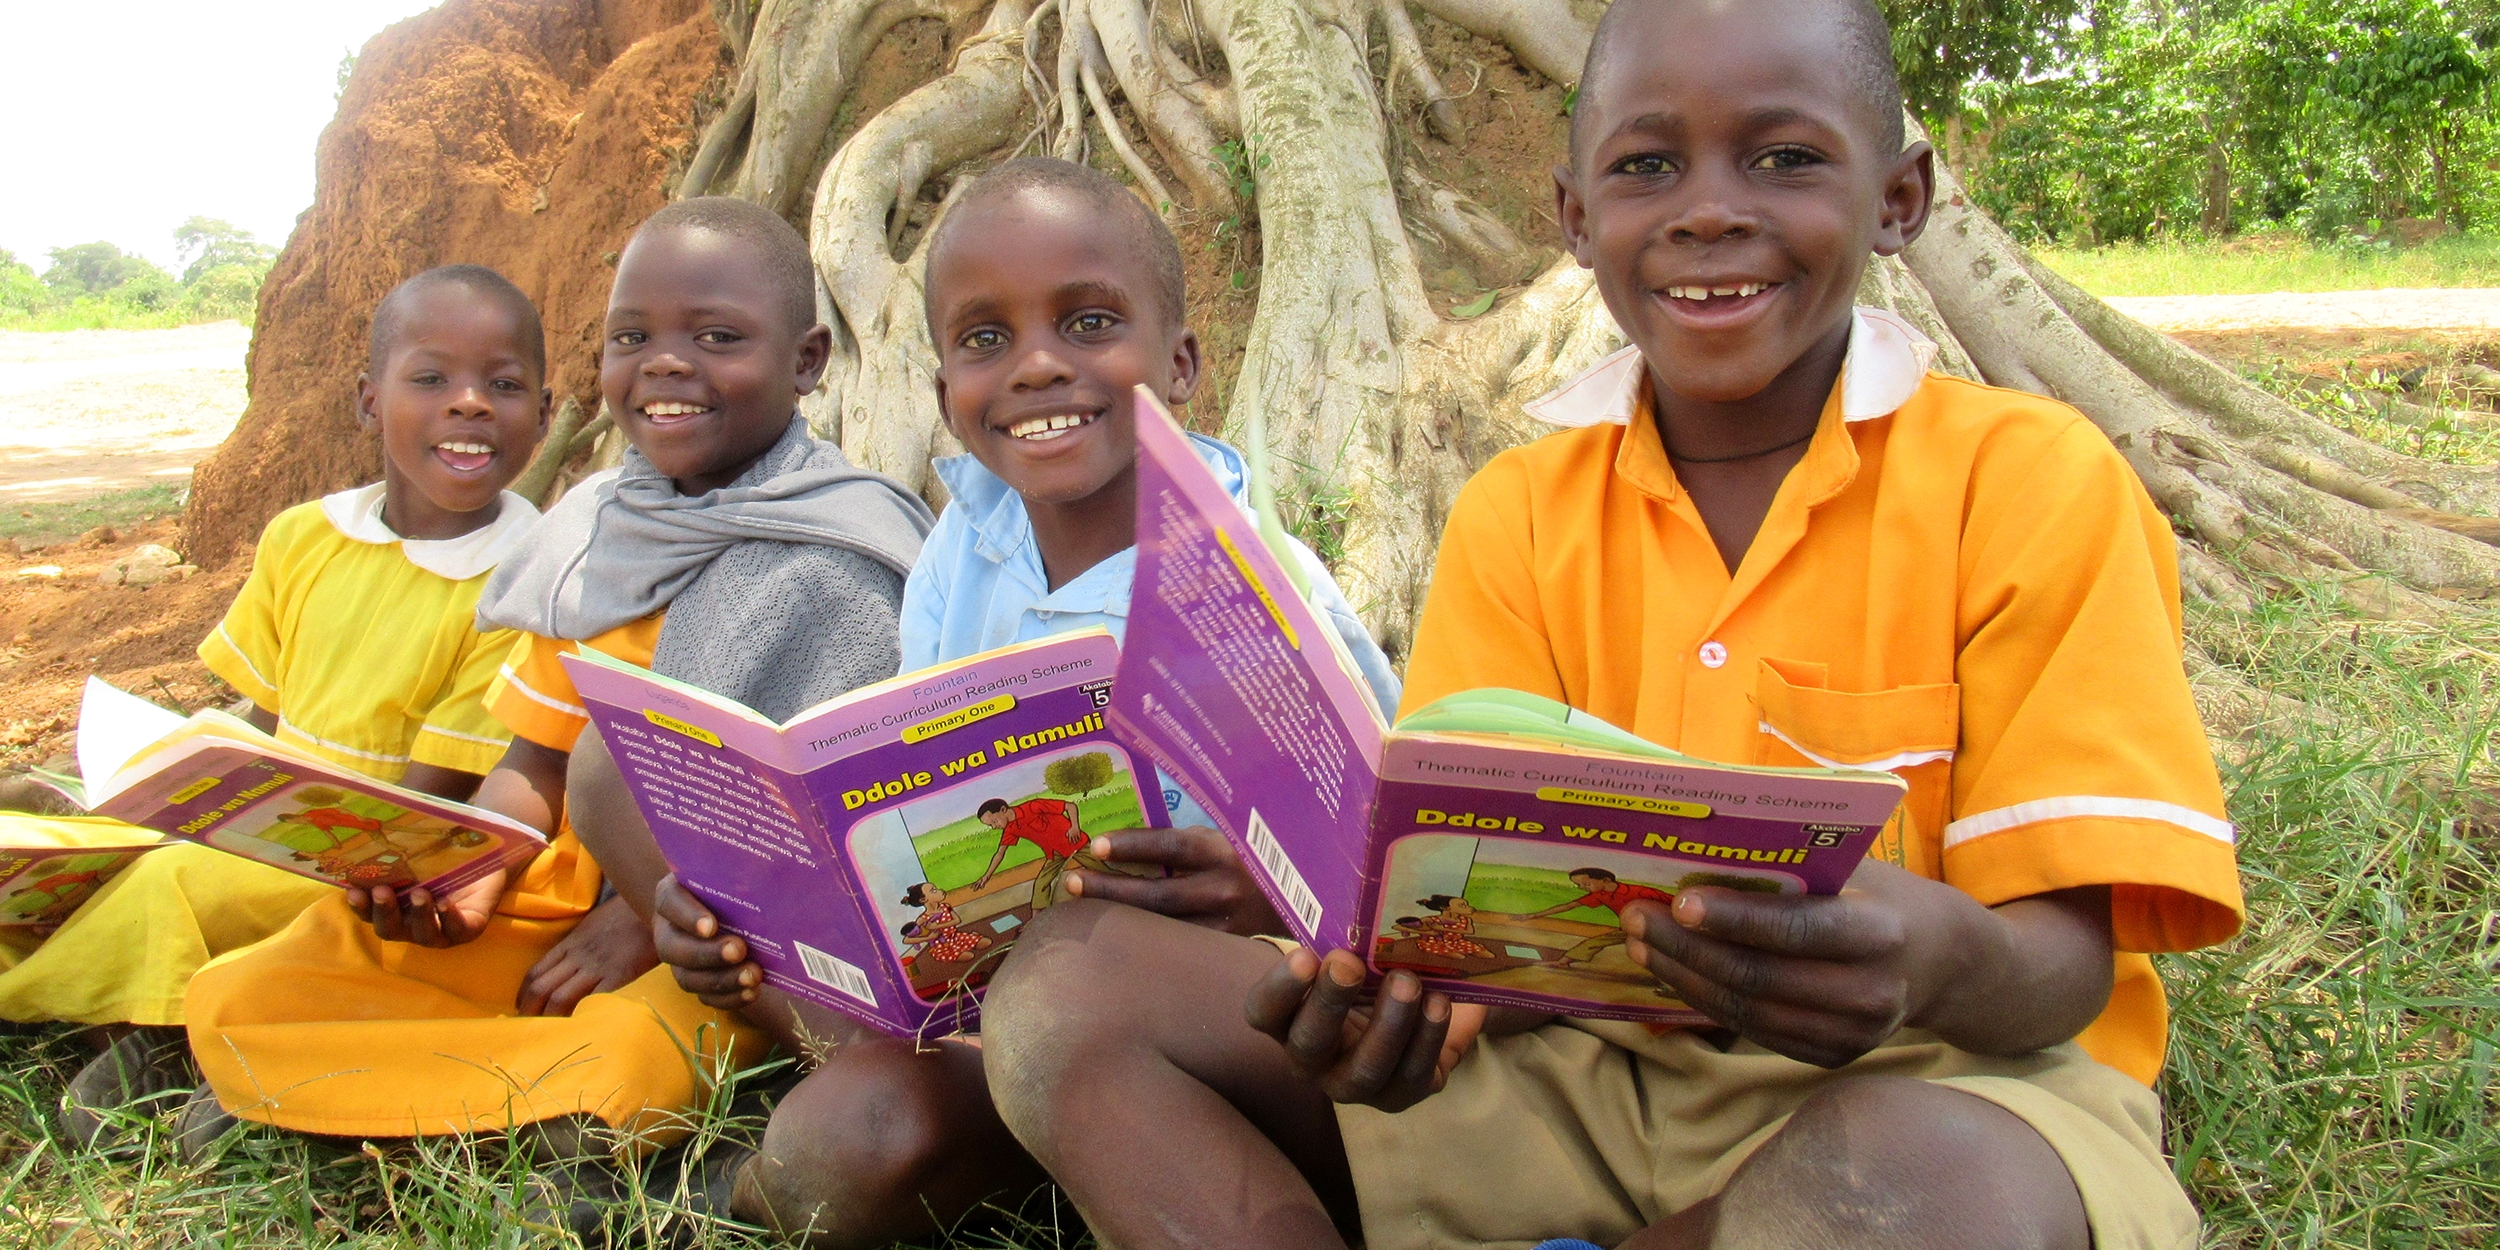 Four children sitting on the ground, holding books and smiling. 